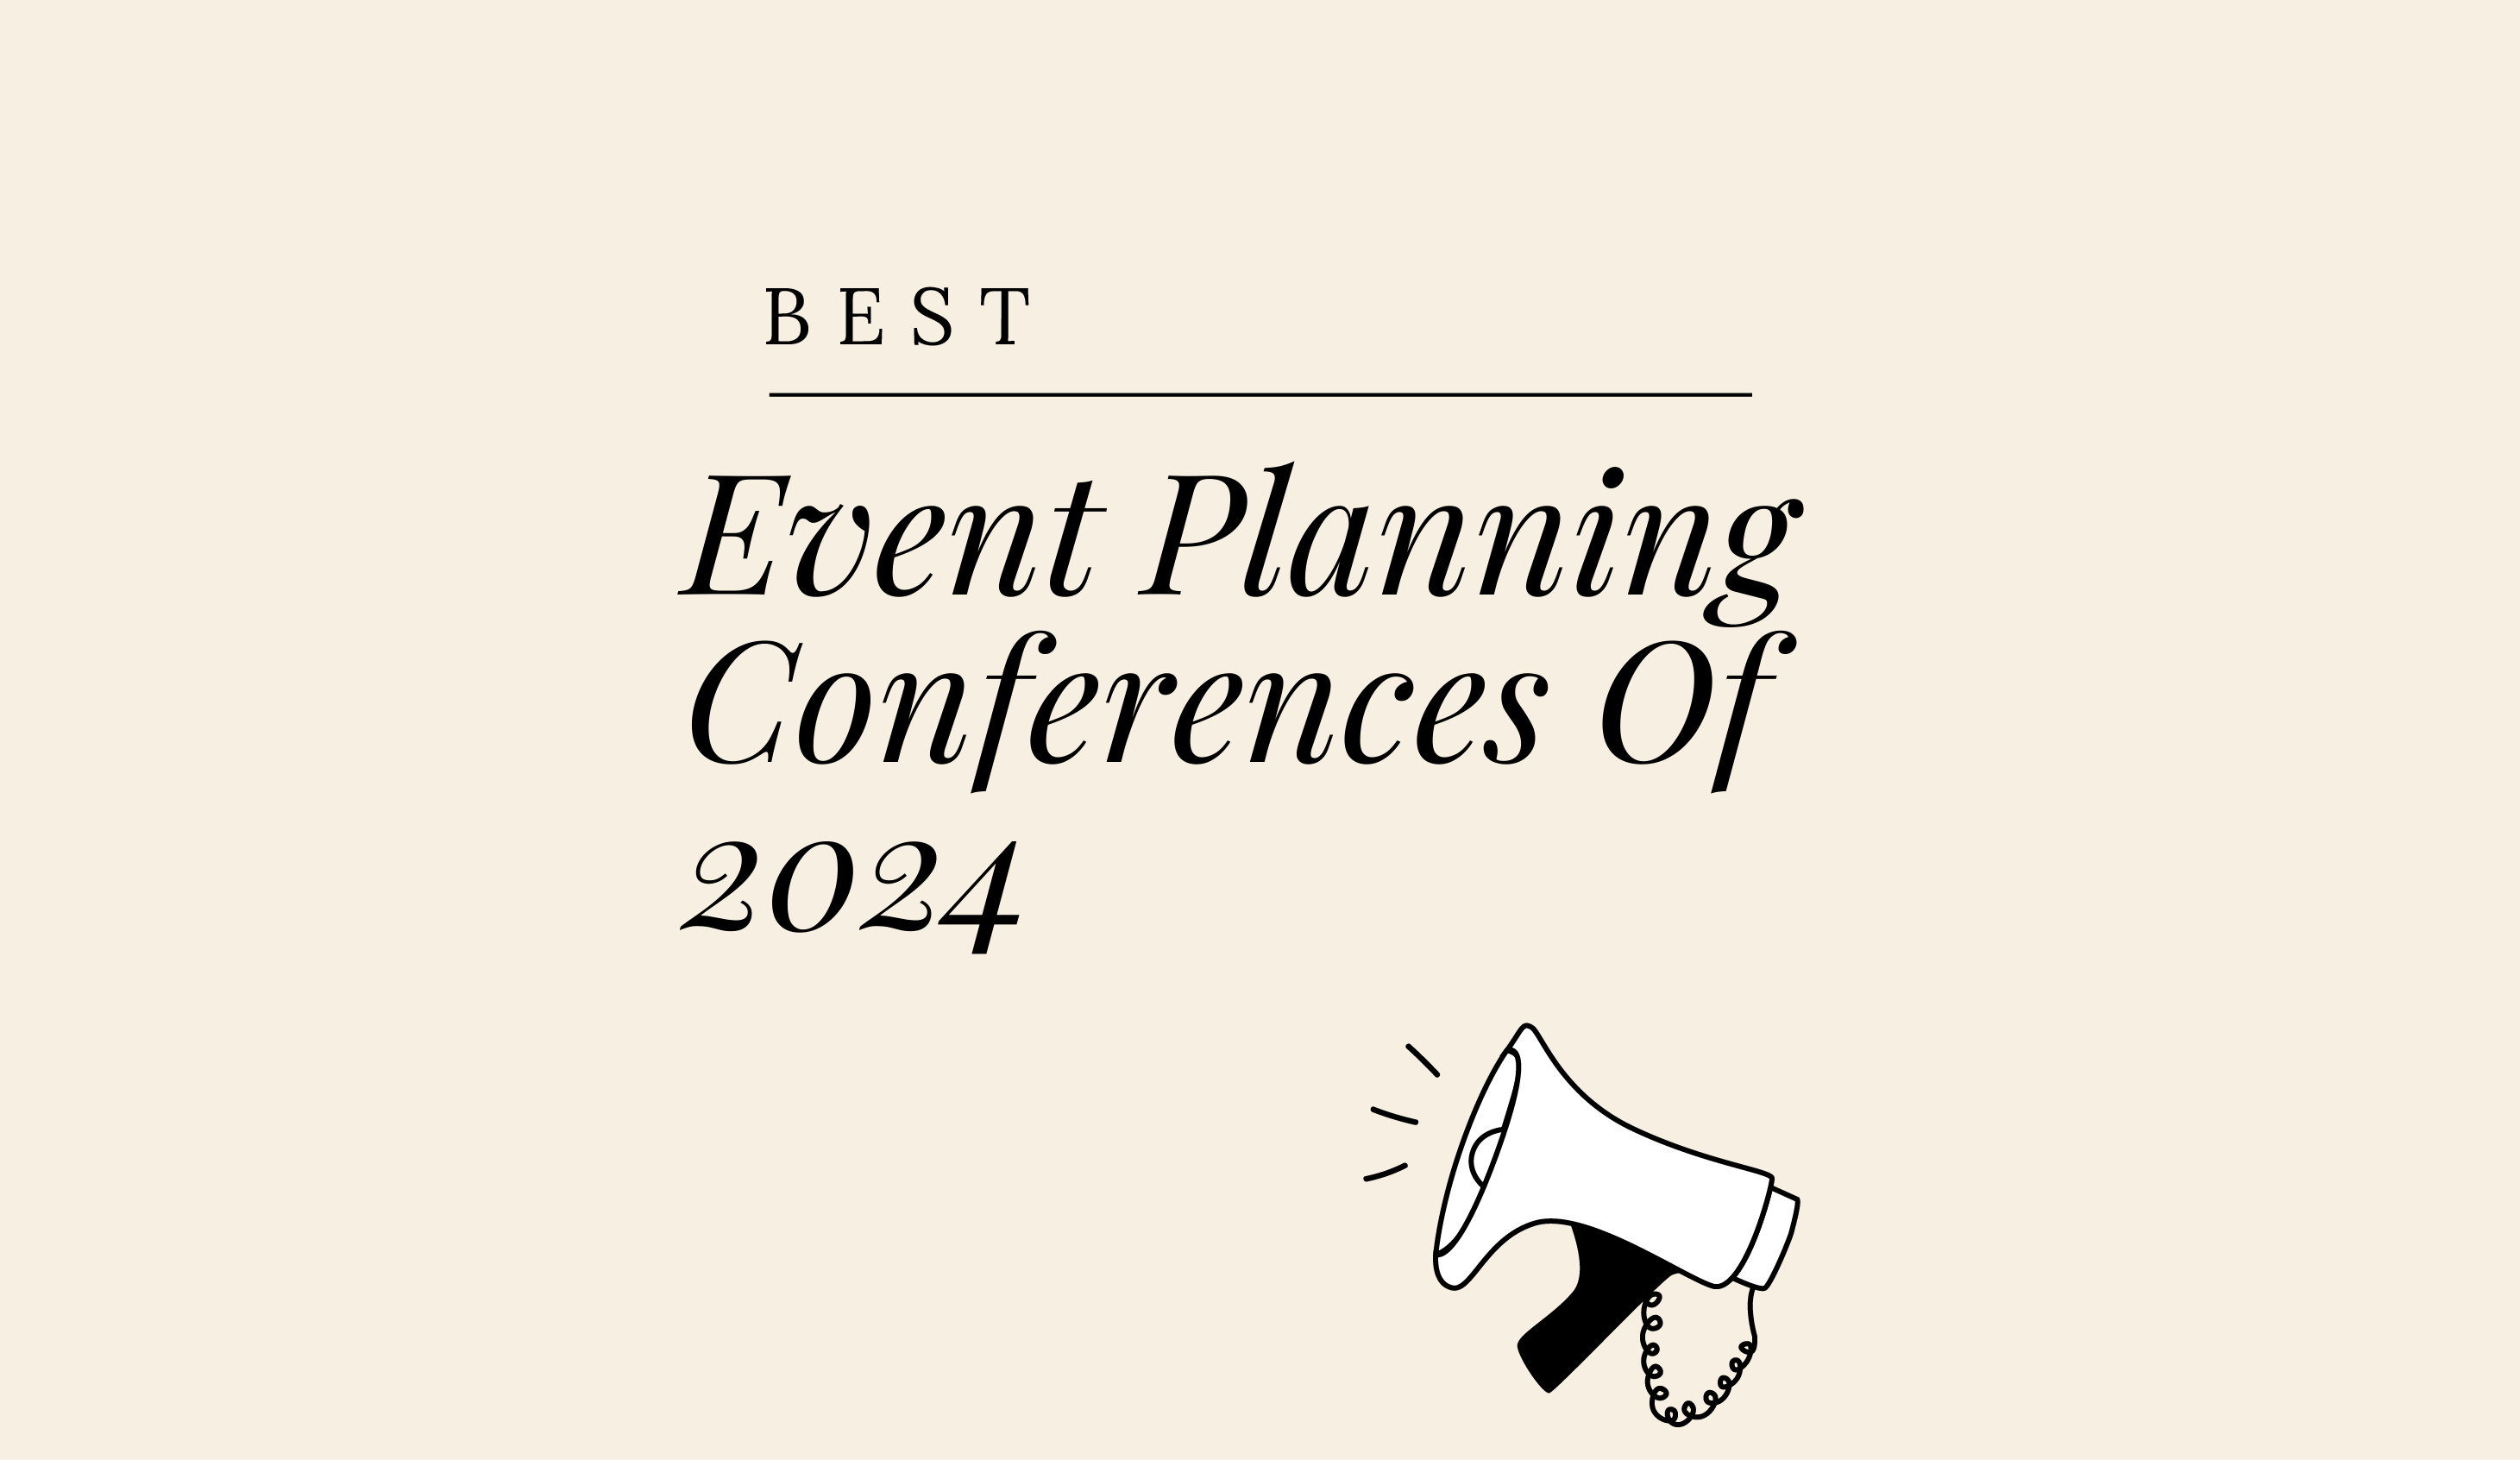 HOT-event-planning-conferences-of-2024-featured-image-1957